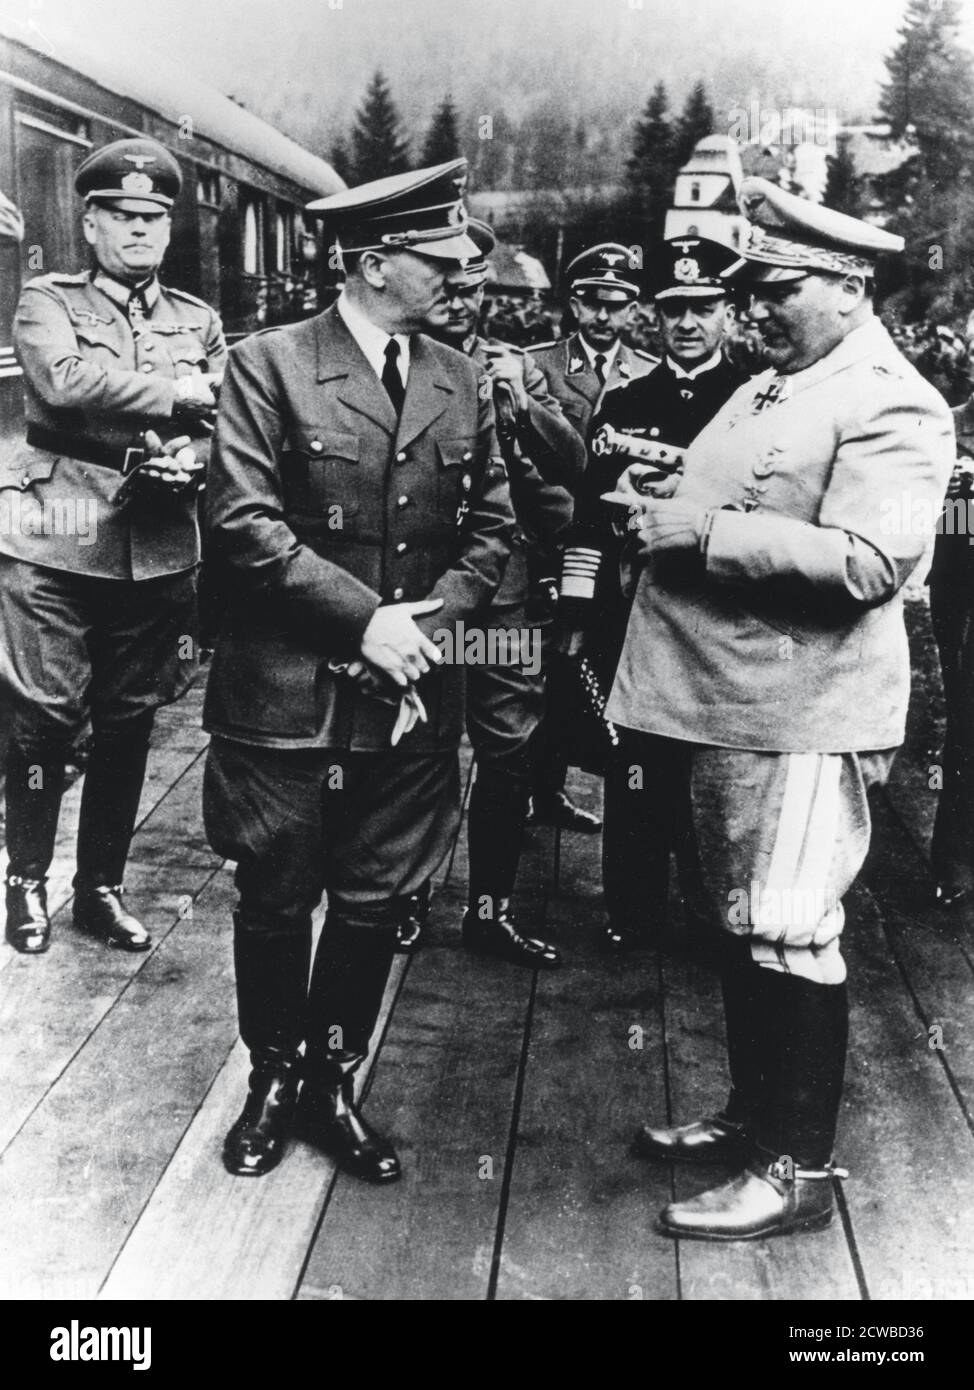 Adolf Hitler and Hermann Goering, Nazi leaders, Germany, 20 April 1941. Hitler, Goering and other senior Nazis at the fuhrer's headquarters on his 52nd birthday. Field Marshal Wilhelm Keitel is to the left of Hitler and Admiral Erich Raeder, commander of the German navy, immediately to the left of Goering. The photographer is unknown. Stock Photo